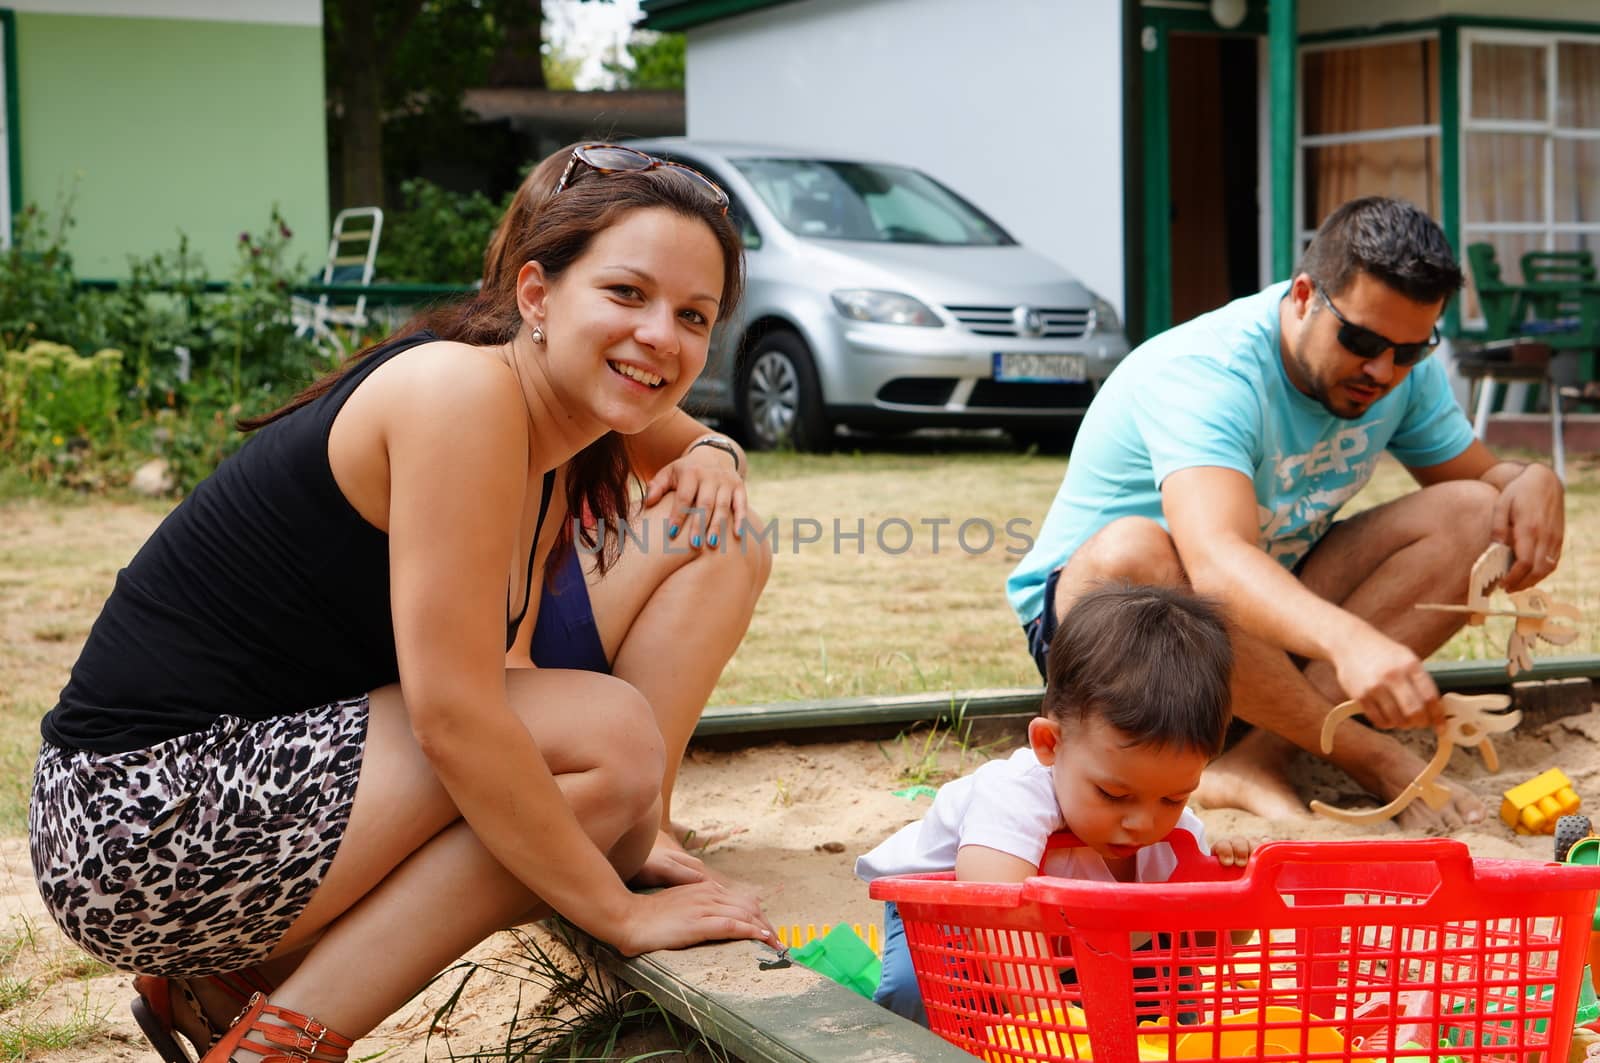 TLEN, POLAND - AUGUST 22, 2015: Woman playing with child on sand at a resort 